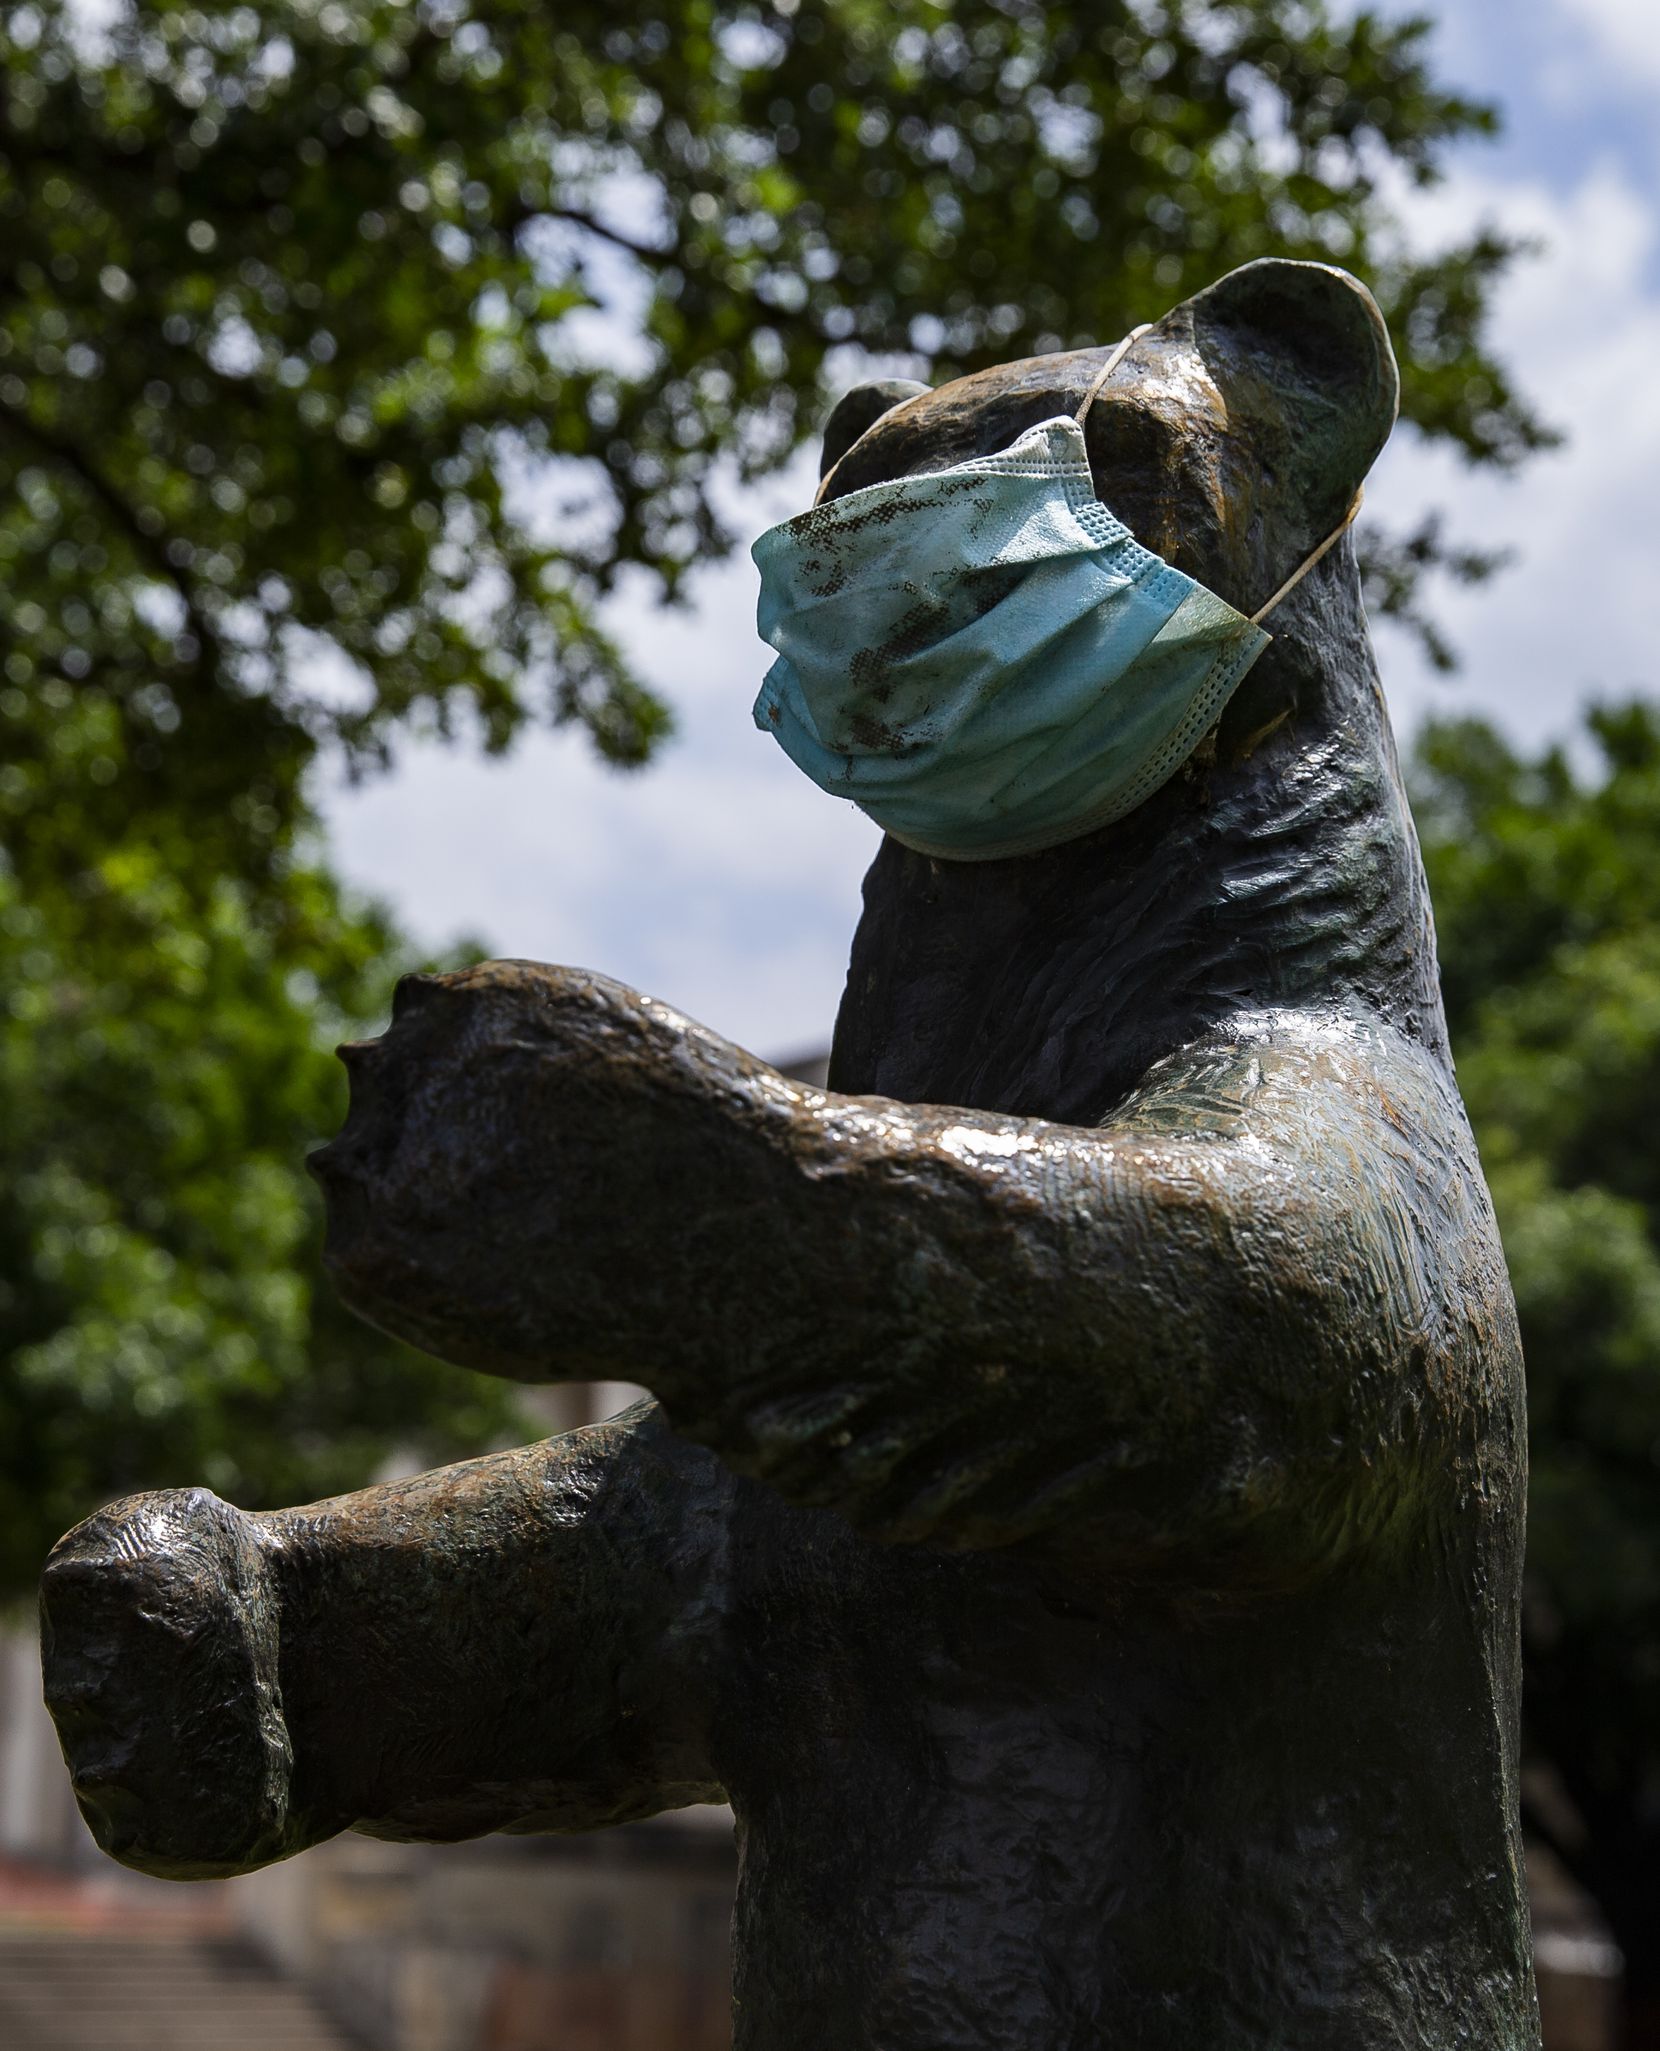 11. The surgical mask is a new addition, but the statue has been around for decades, hiding...